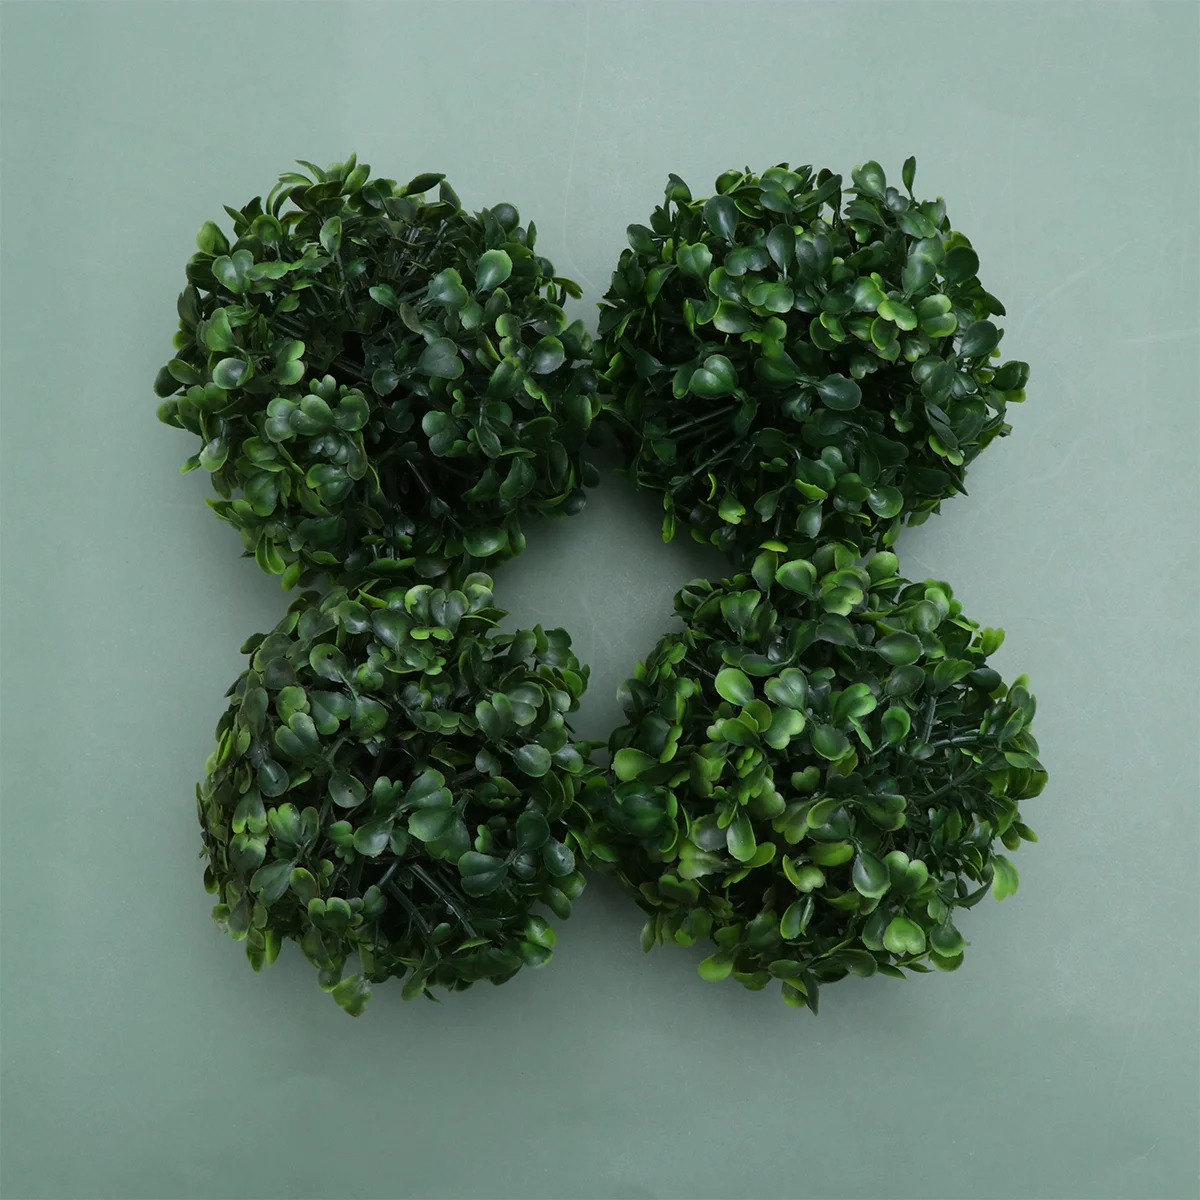 

Topiary Artificial Boxwood Hanging Fake Decor Green Garden Front Planters Spheres Door Ornament Greenery Decoration Wedding